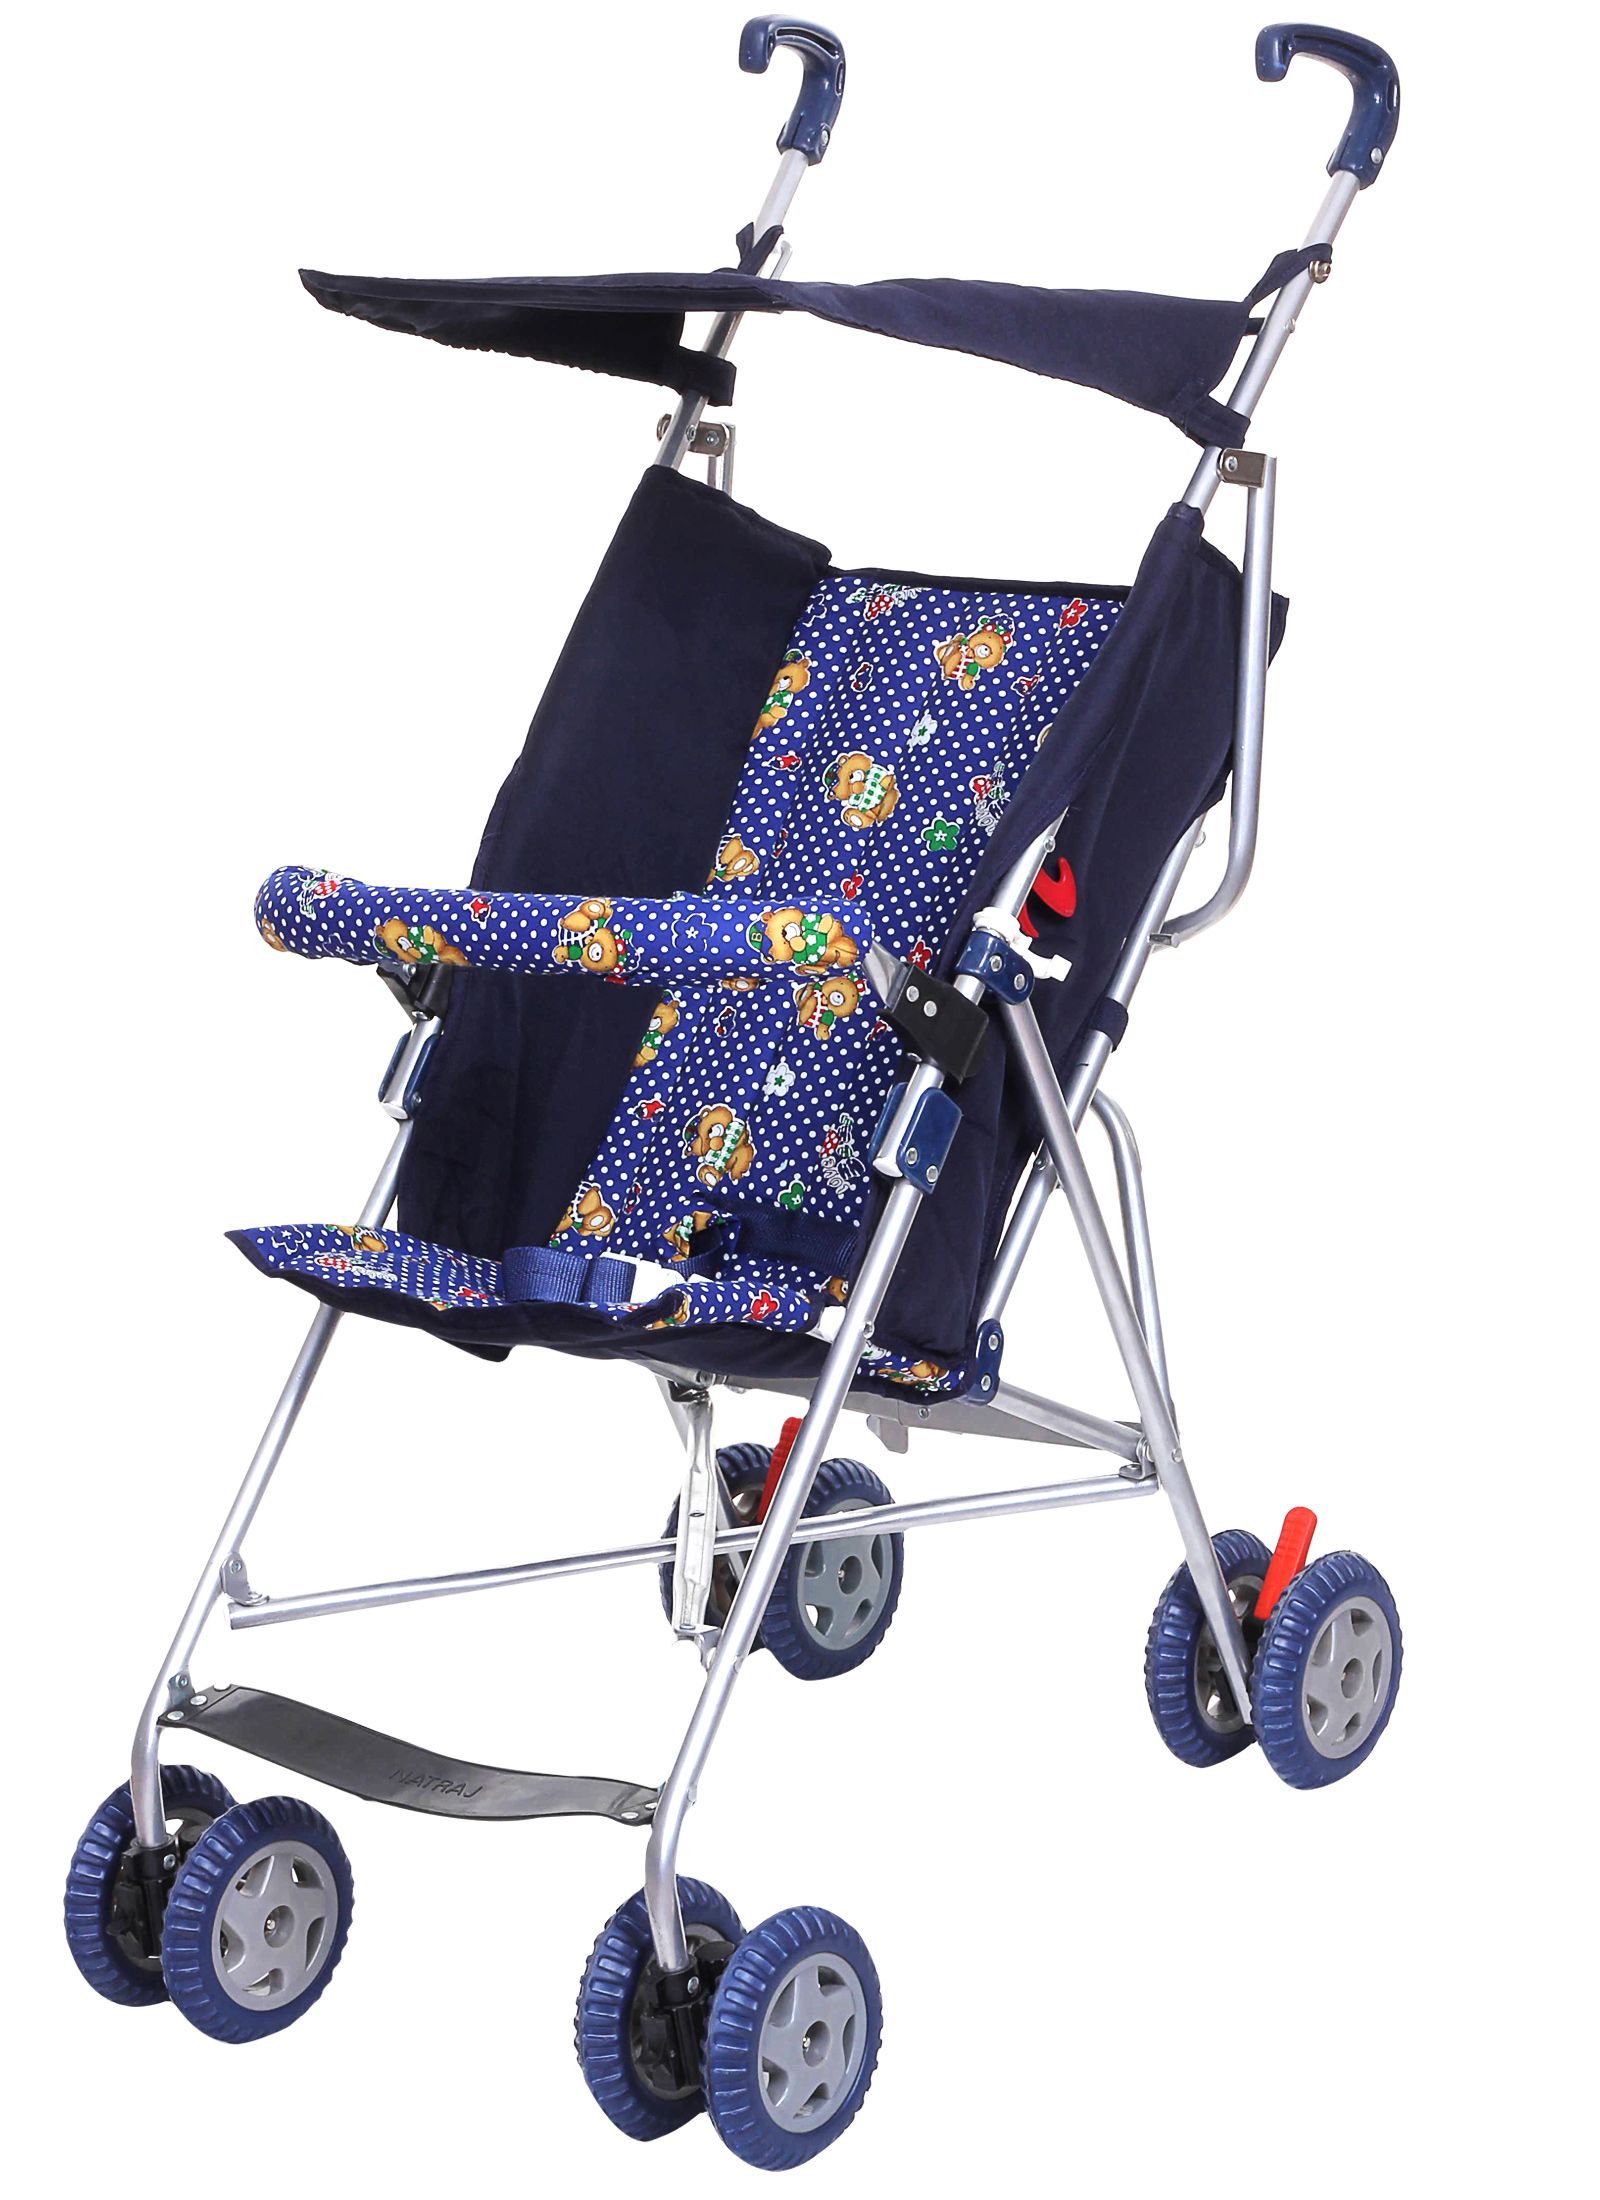 Deluxe Umbrella Buggy With Blue Bear Print